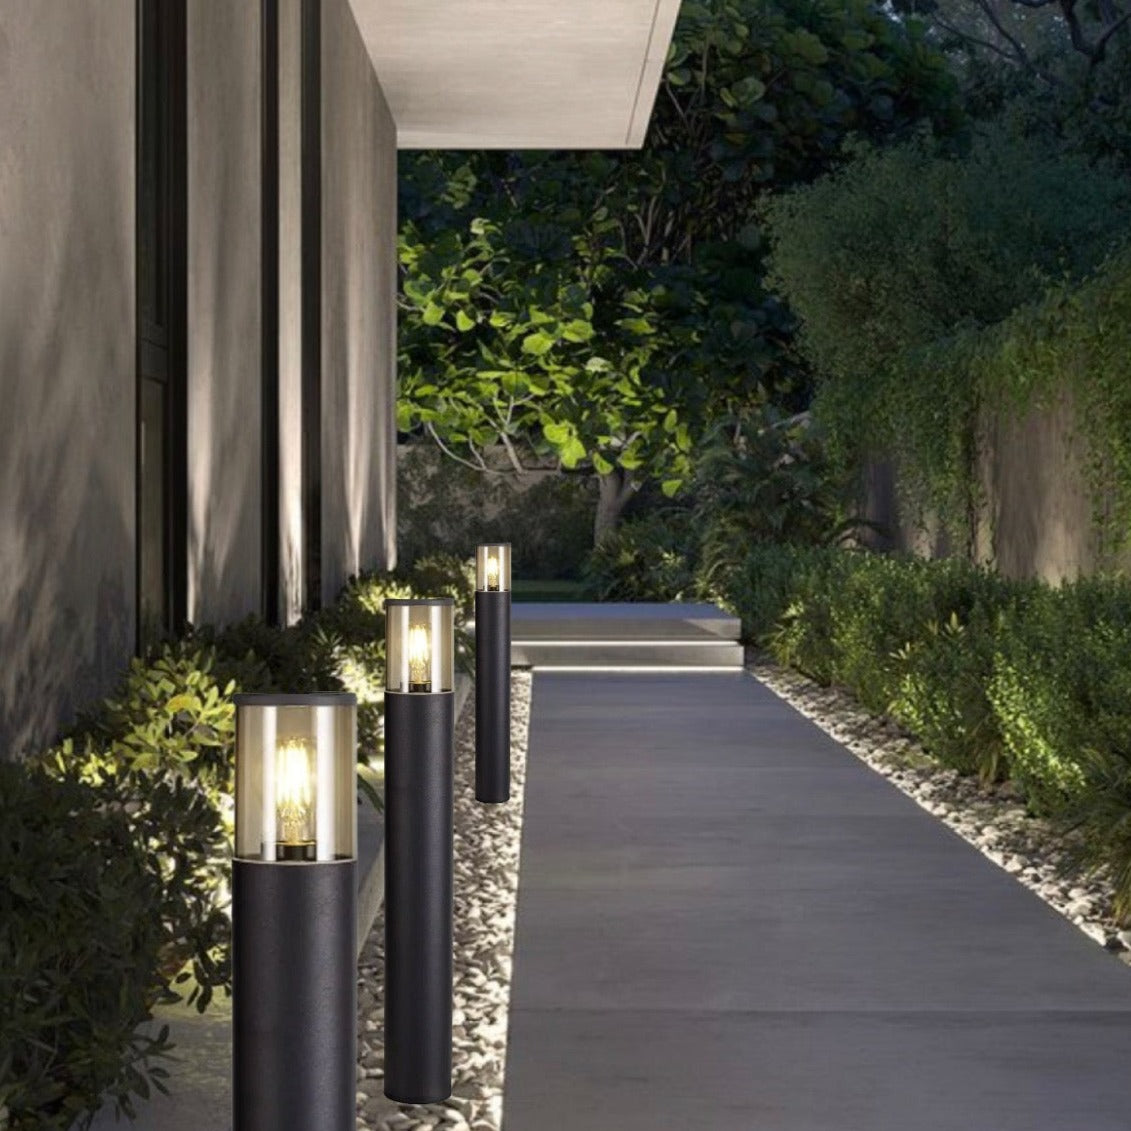 Our Bluebell black outdoor post light would look perfect in a modern or more traditional home design. Outside post lights can provide atmospheric light in your garden, at the front door or on the terrace as well as a great security solution. It is designed for durability and longevity with its robust material producing a fully weatherproof and water-resistant light fitting.